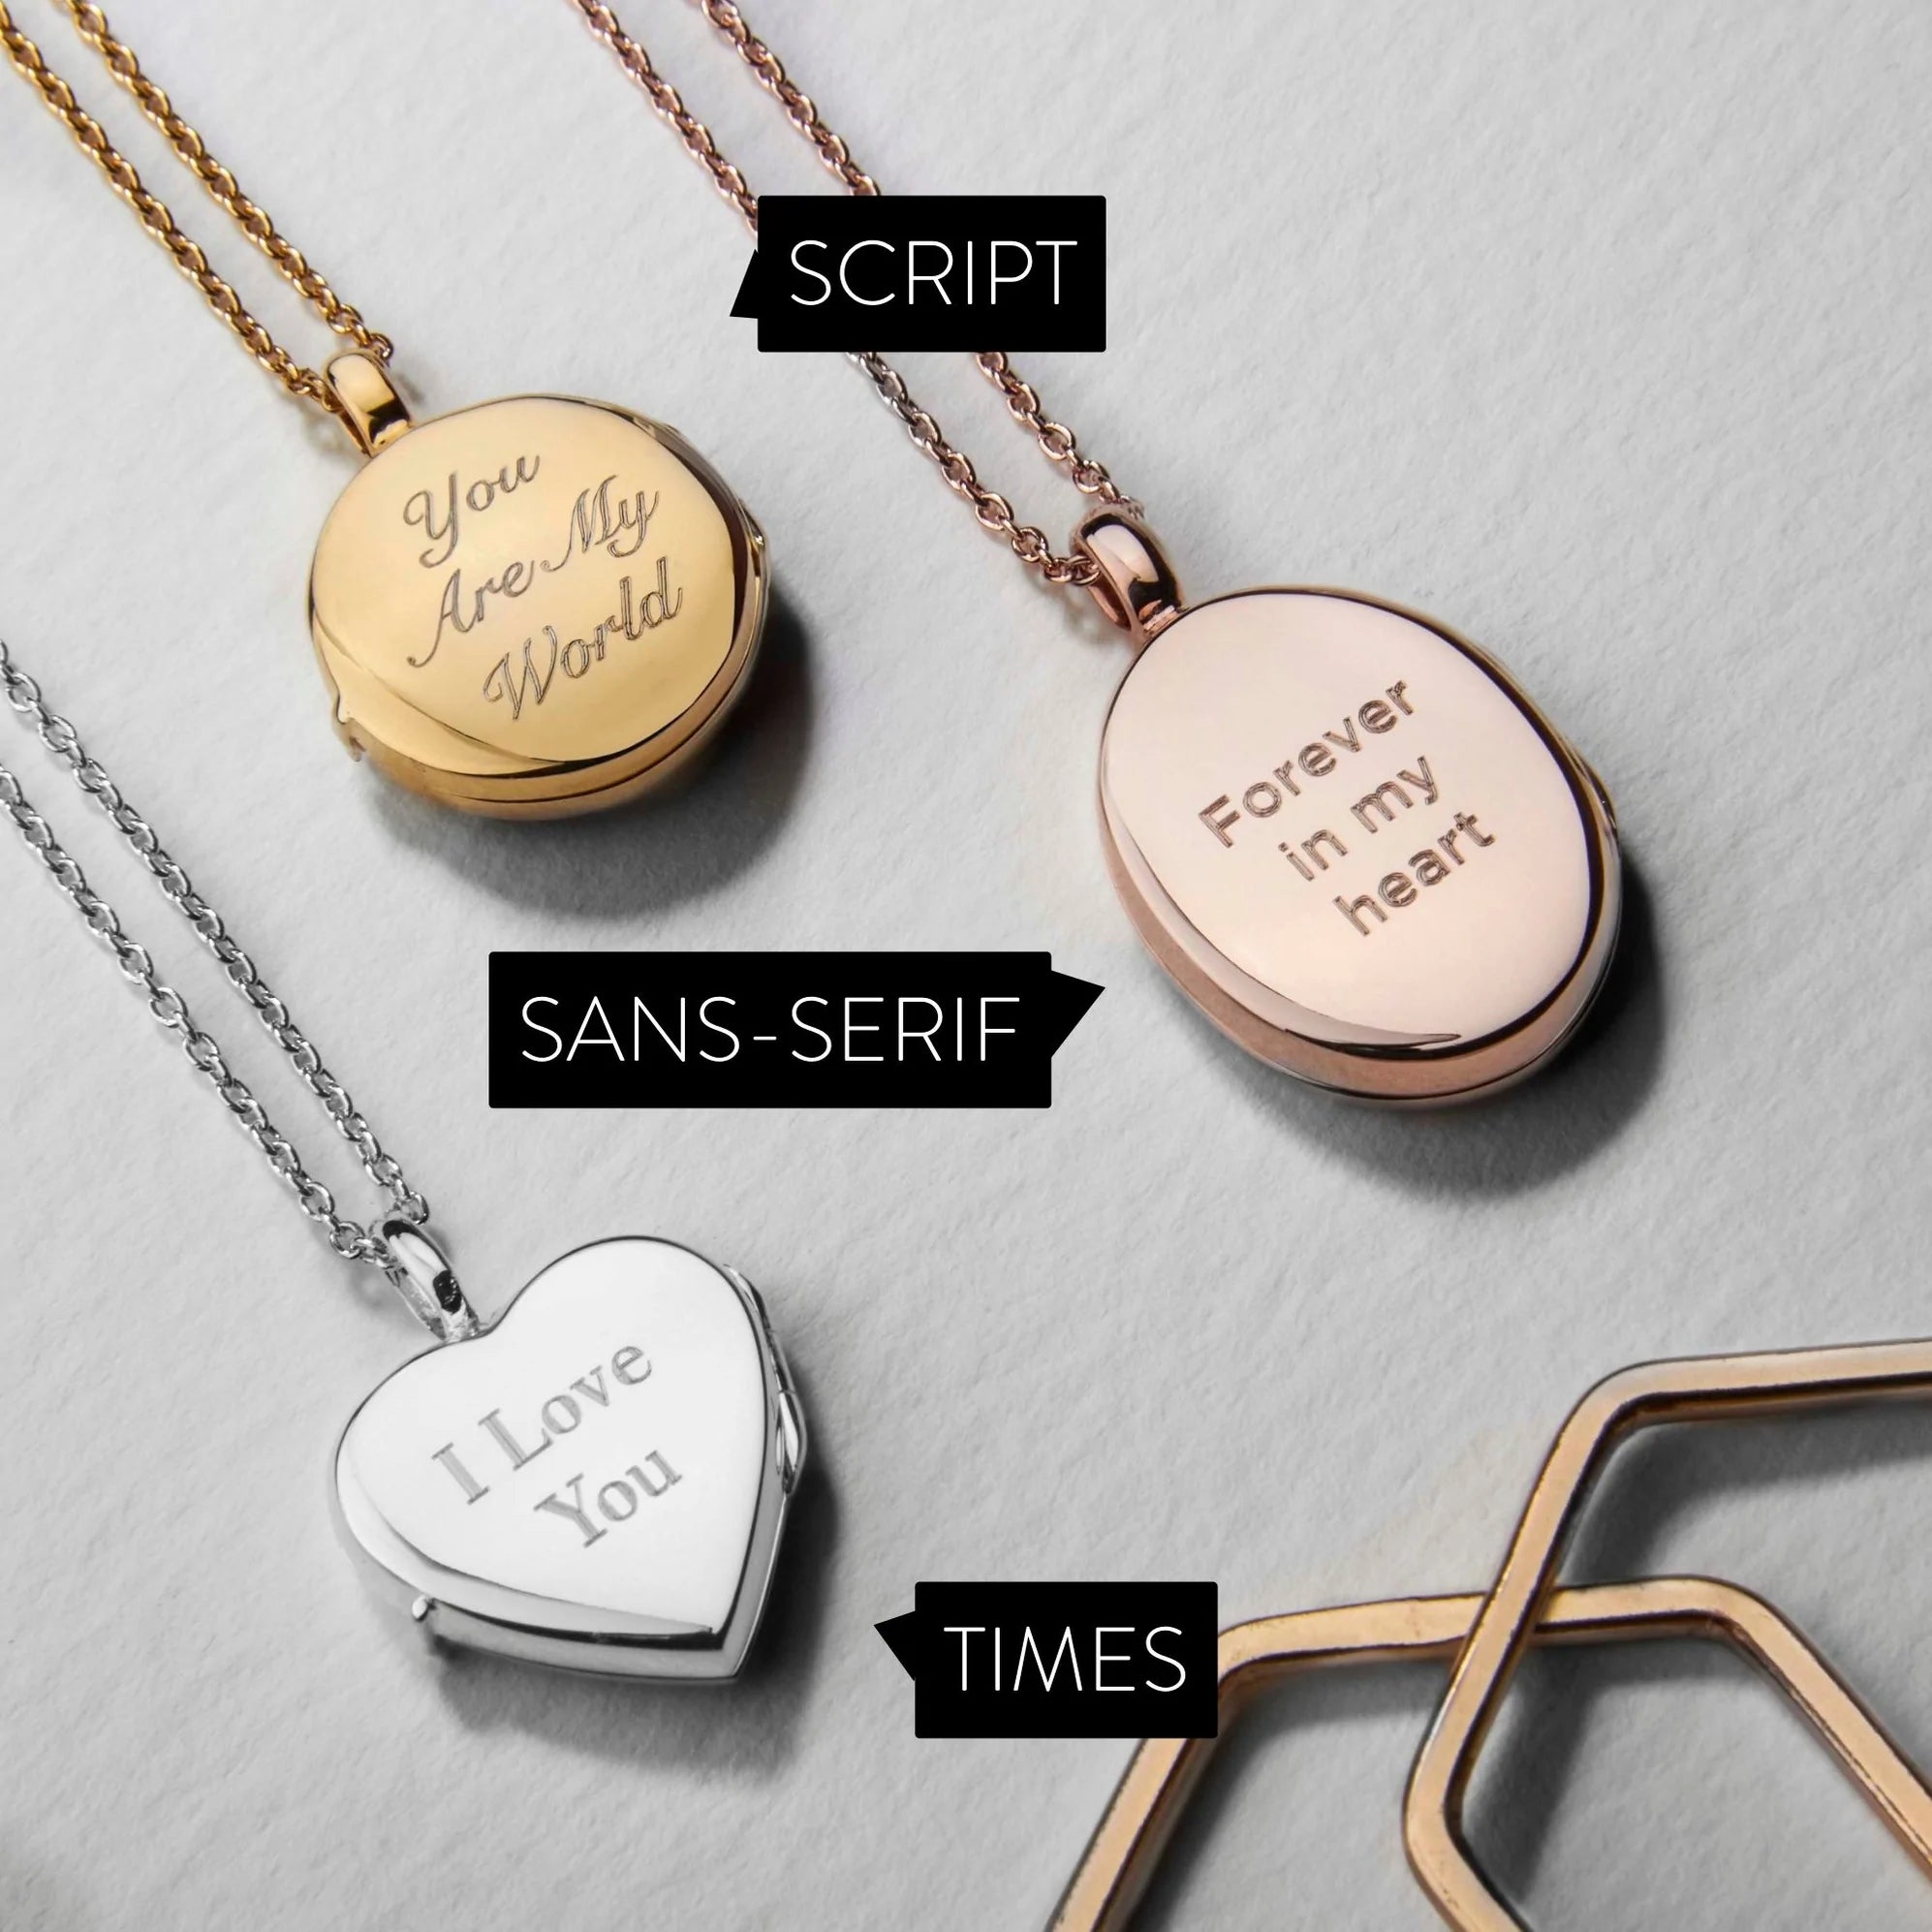 Locket Necklaces: Monogram Trio, Rose Gold, Heart, Engraved Front, Gray by Shutterfly